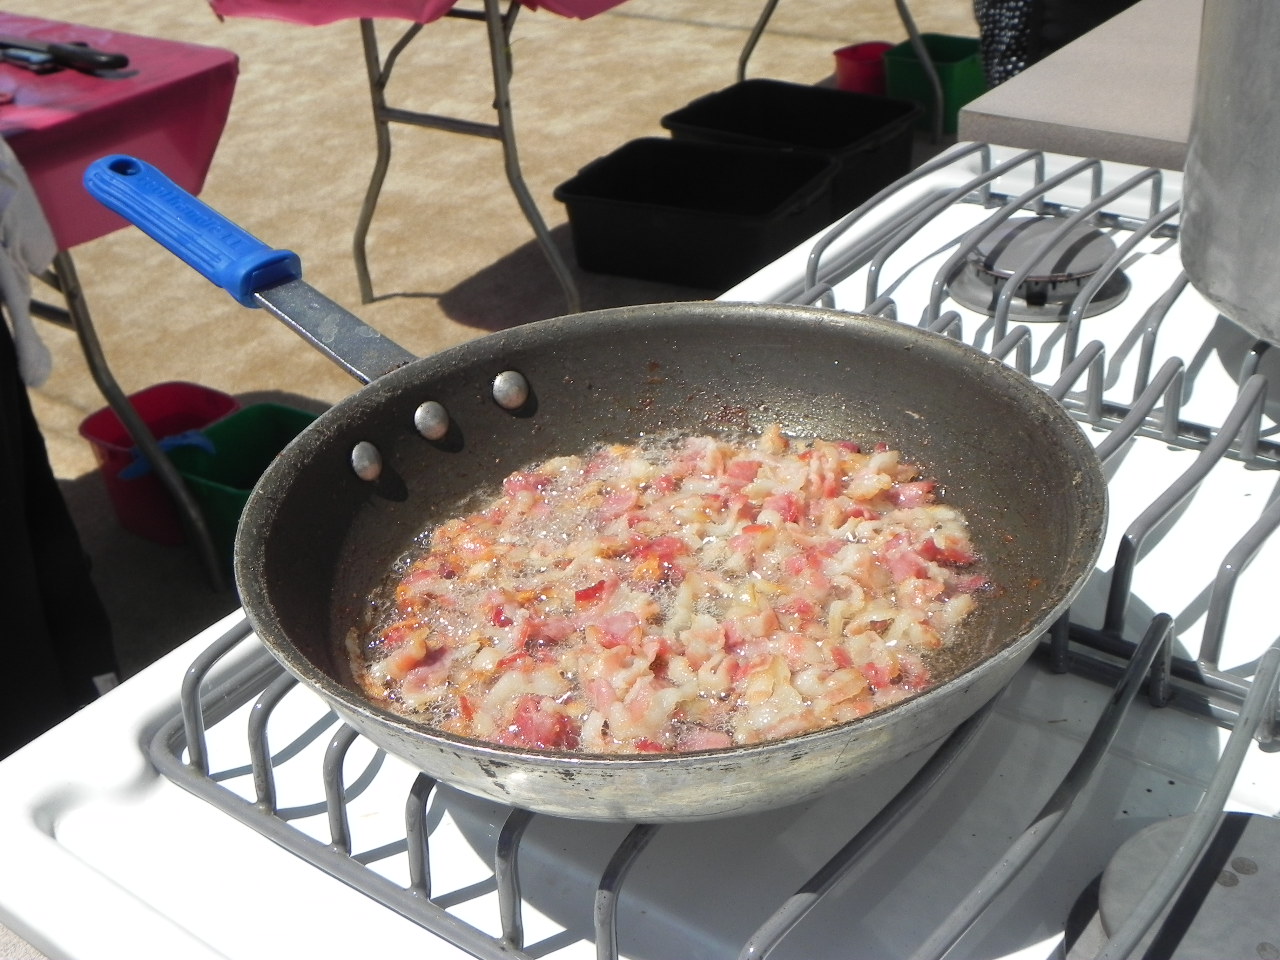 Bacon sizzles in the pan. It became part of the bacon jam used in lobster dish. Photo: Gina Scialabba